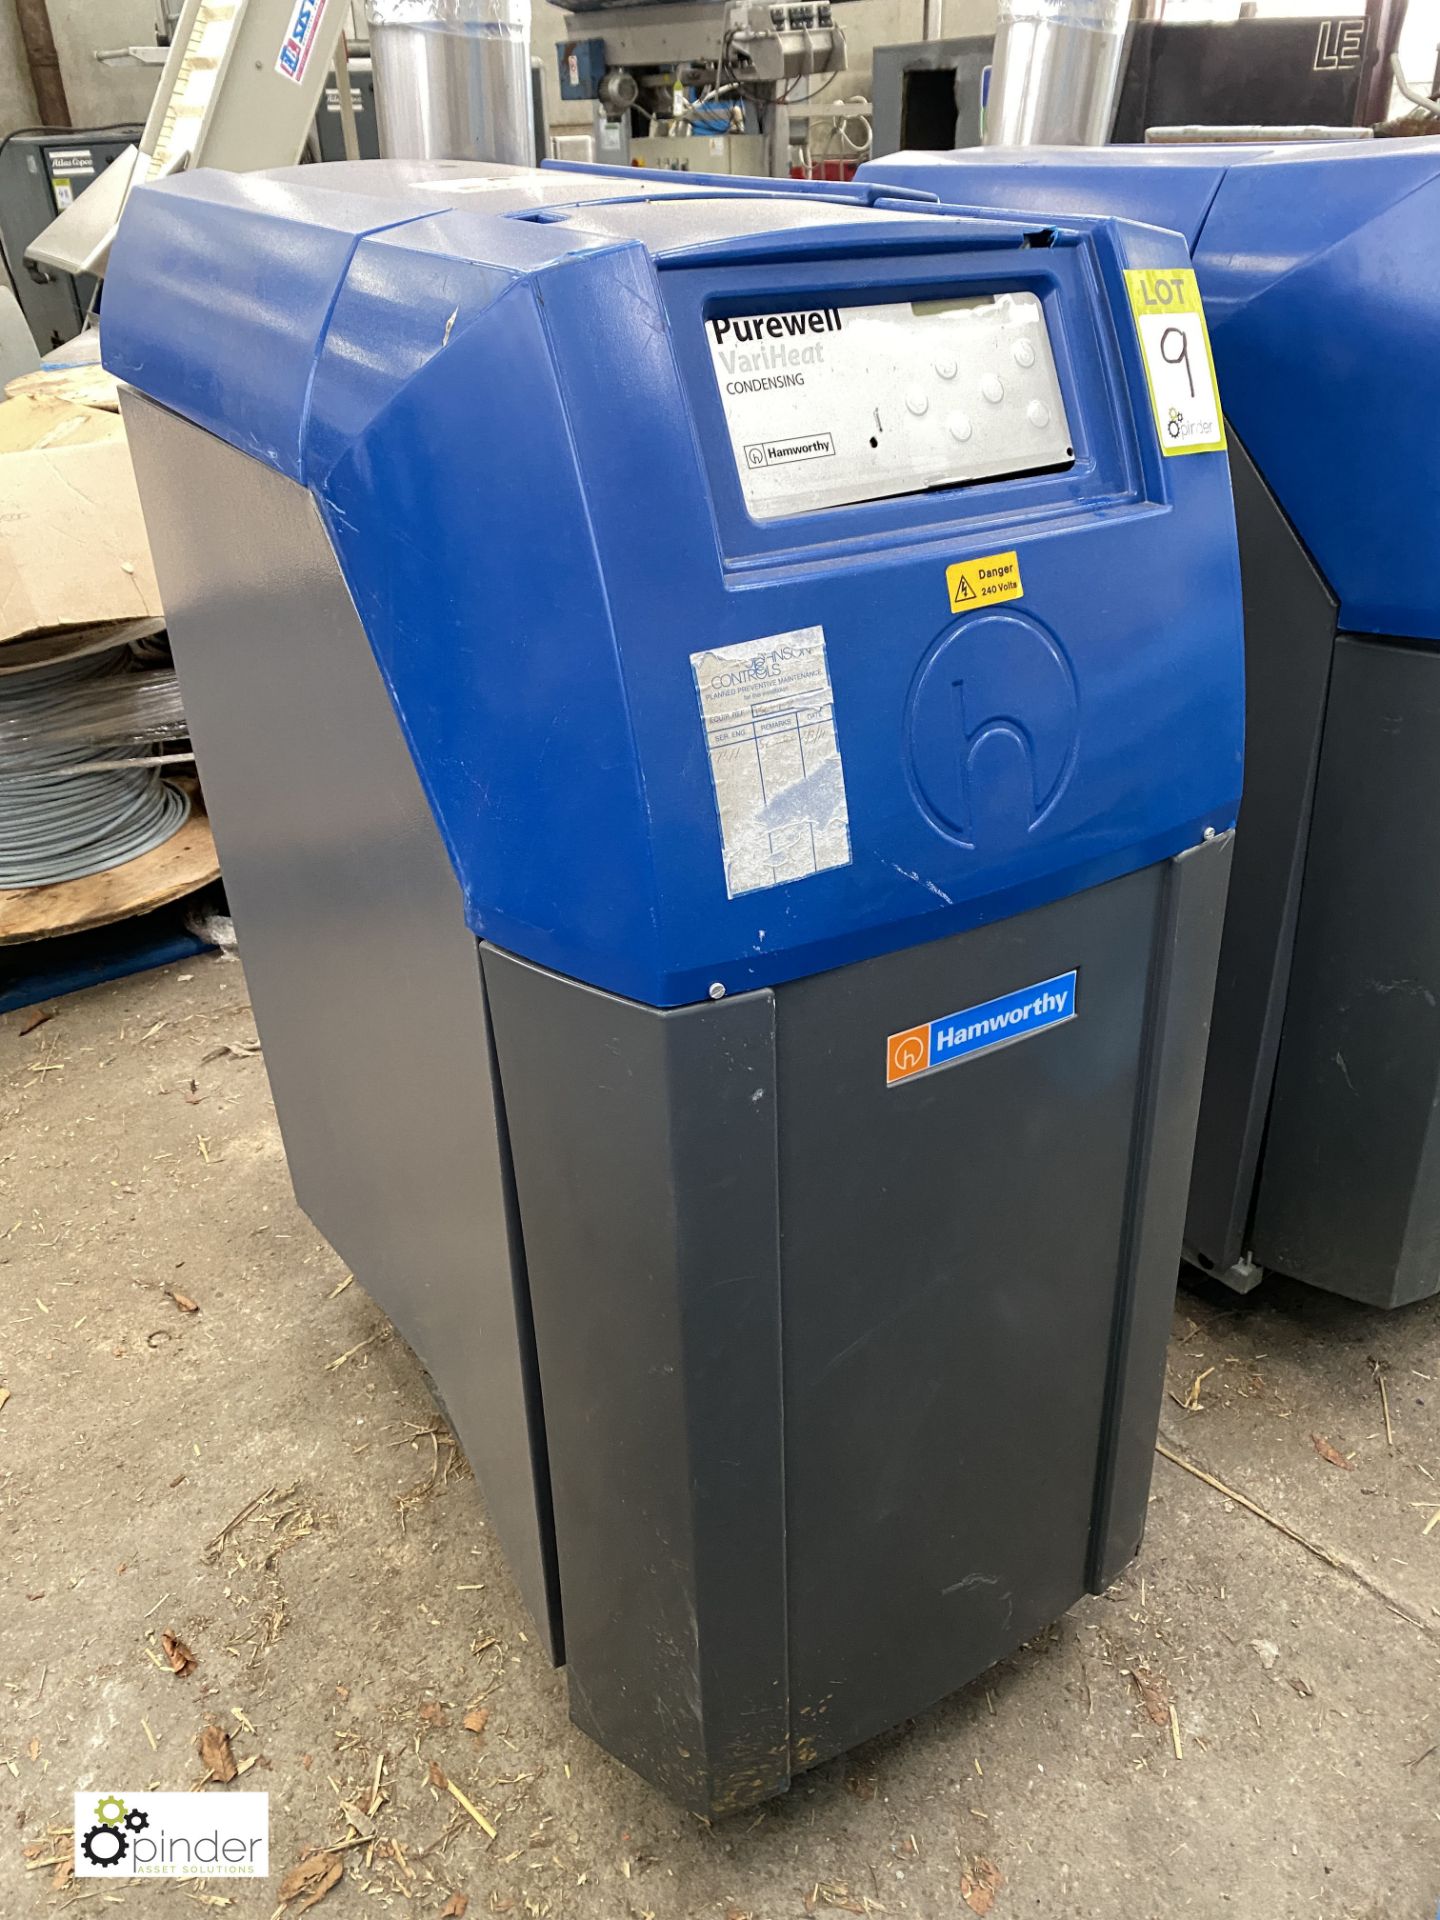 Hamworthy Purewell Vari-Heat 110 Condensing Boiler, 230volts, 110kw output (please note this lot has